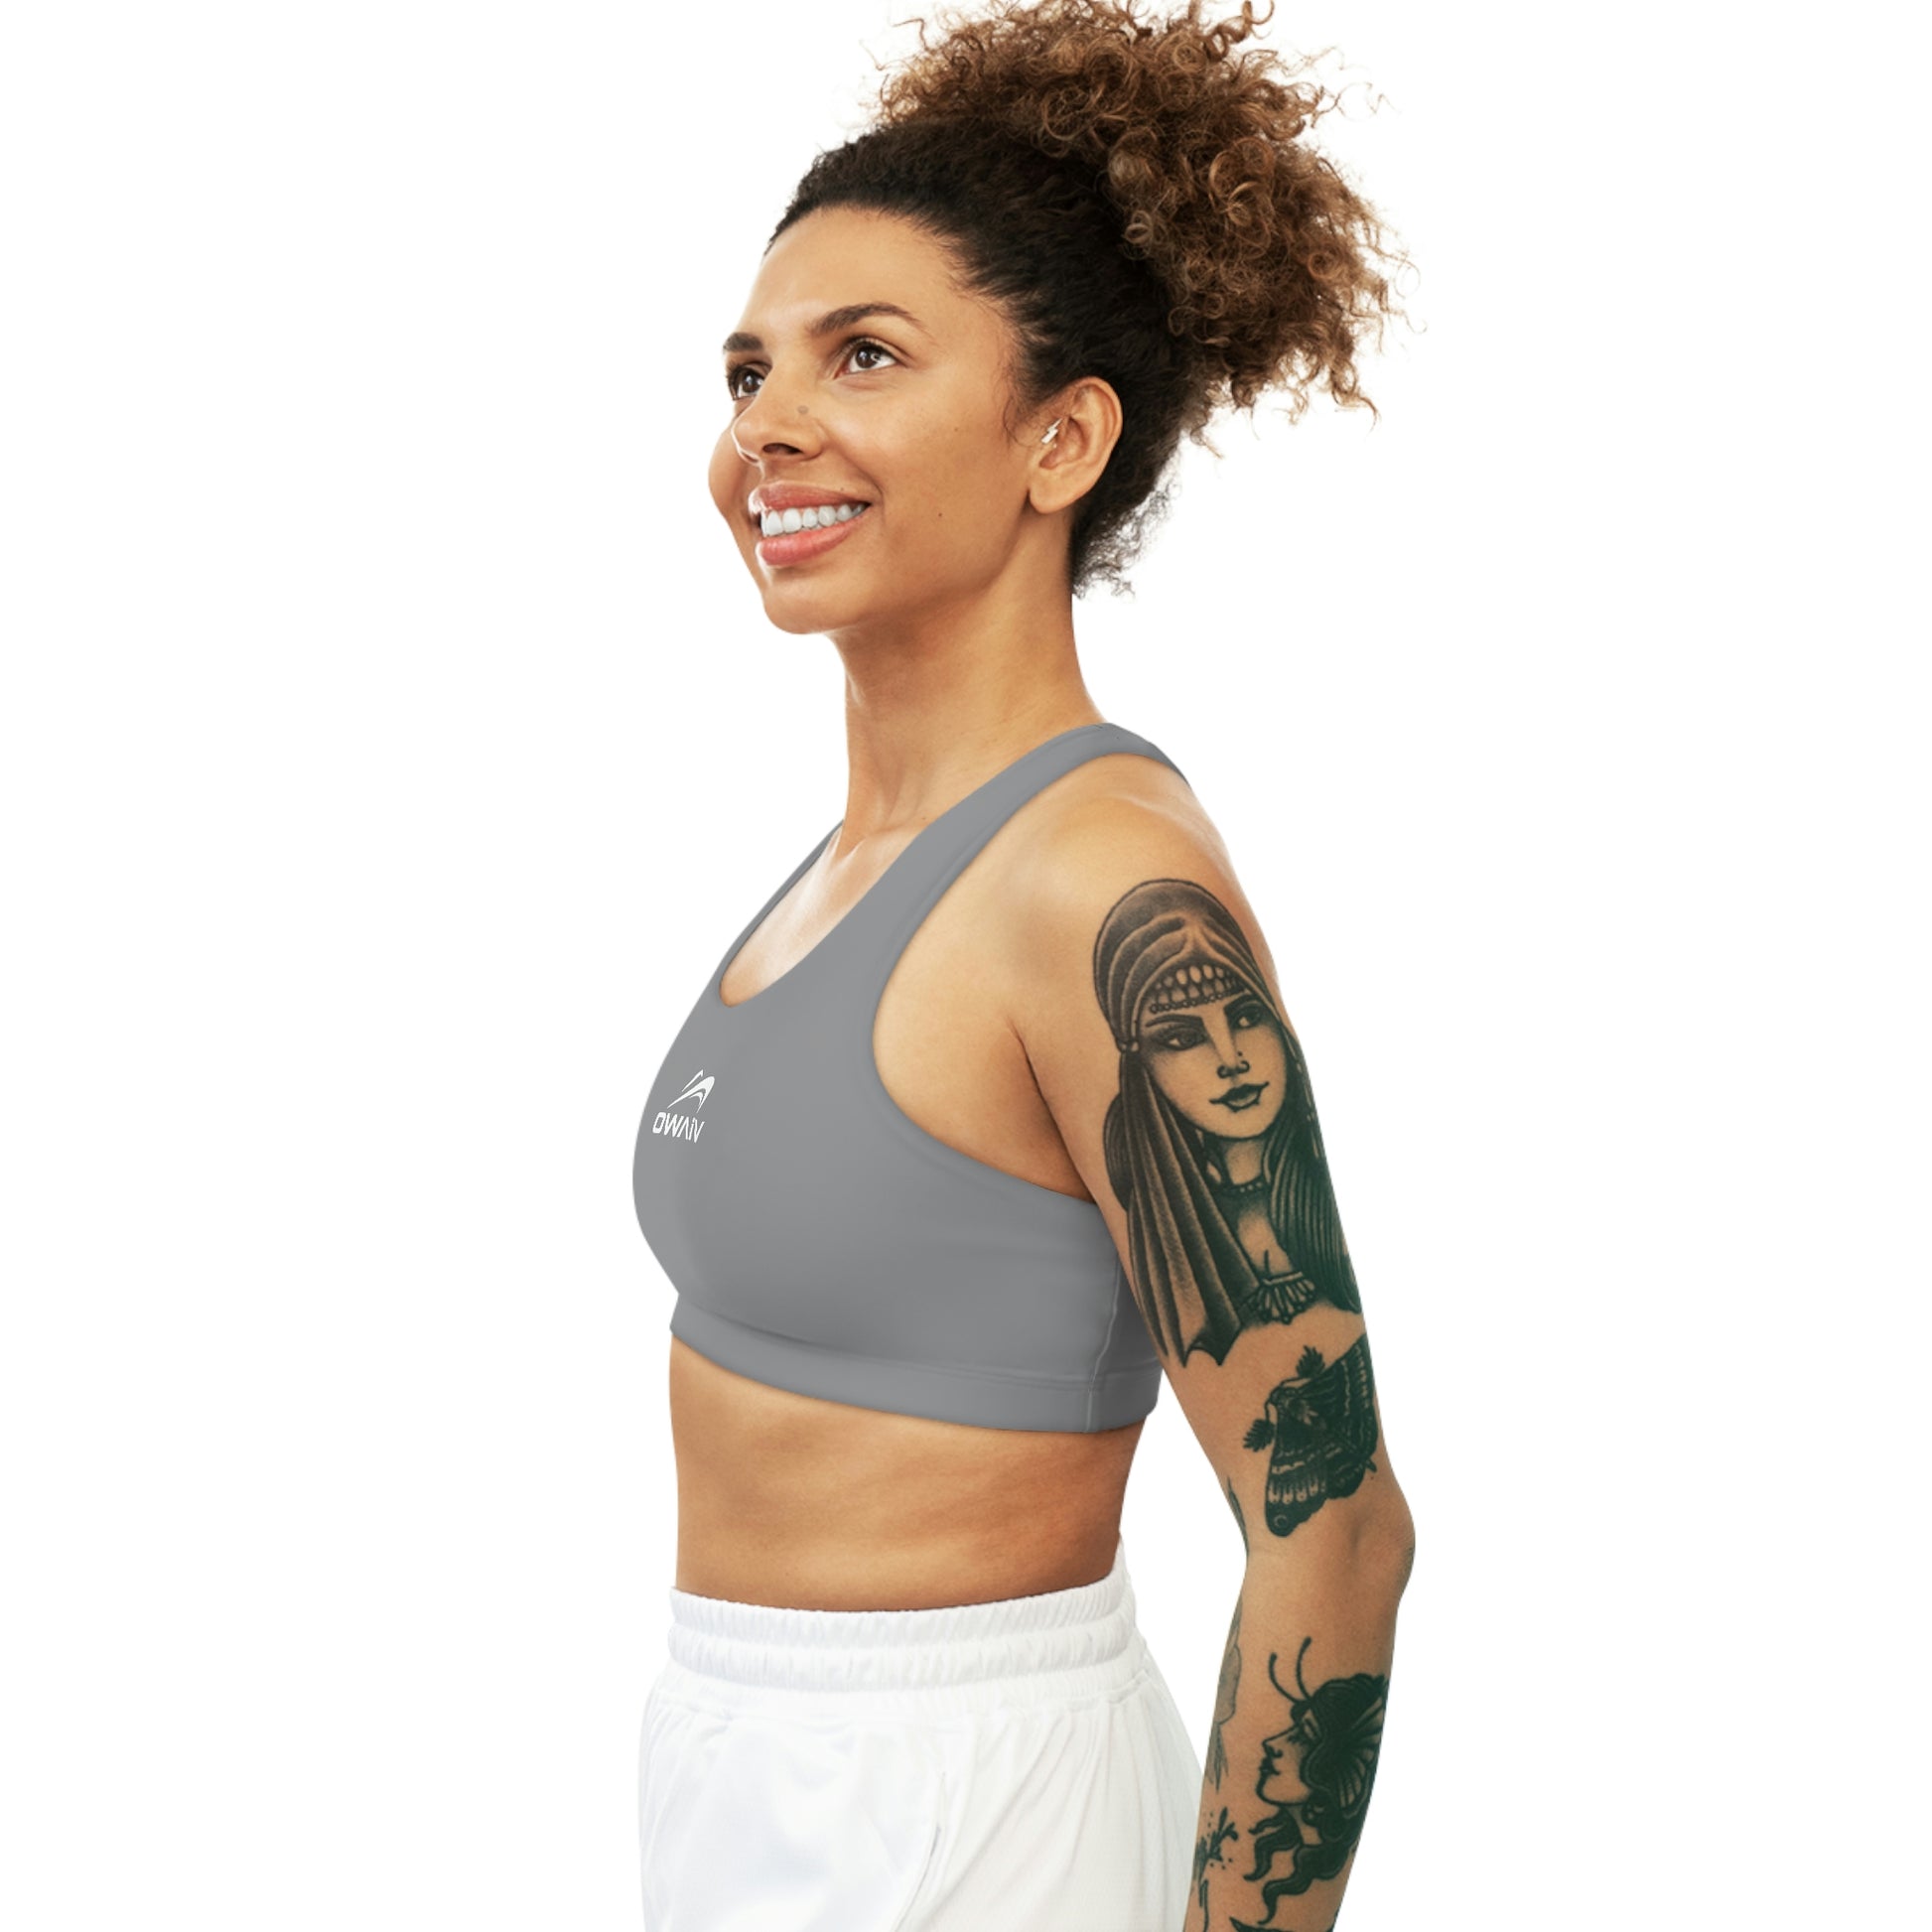 Seamless Thong Grey Sports Bra Set With Letter Embroidery For Women 230520  From Bai06, $19.42